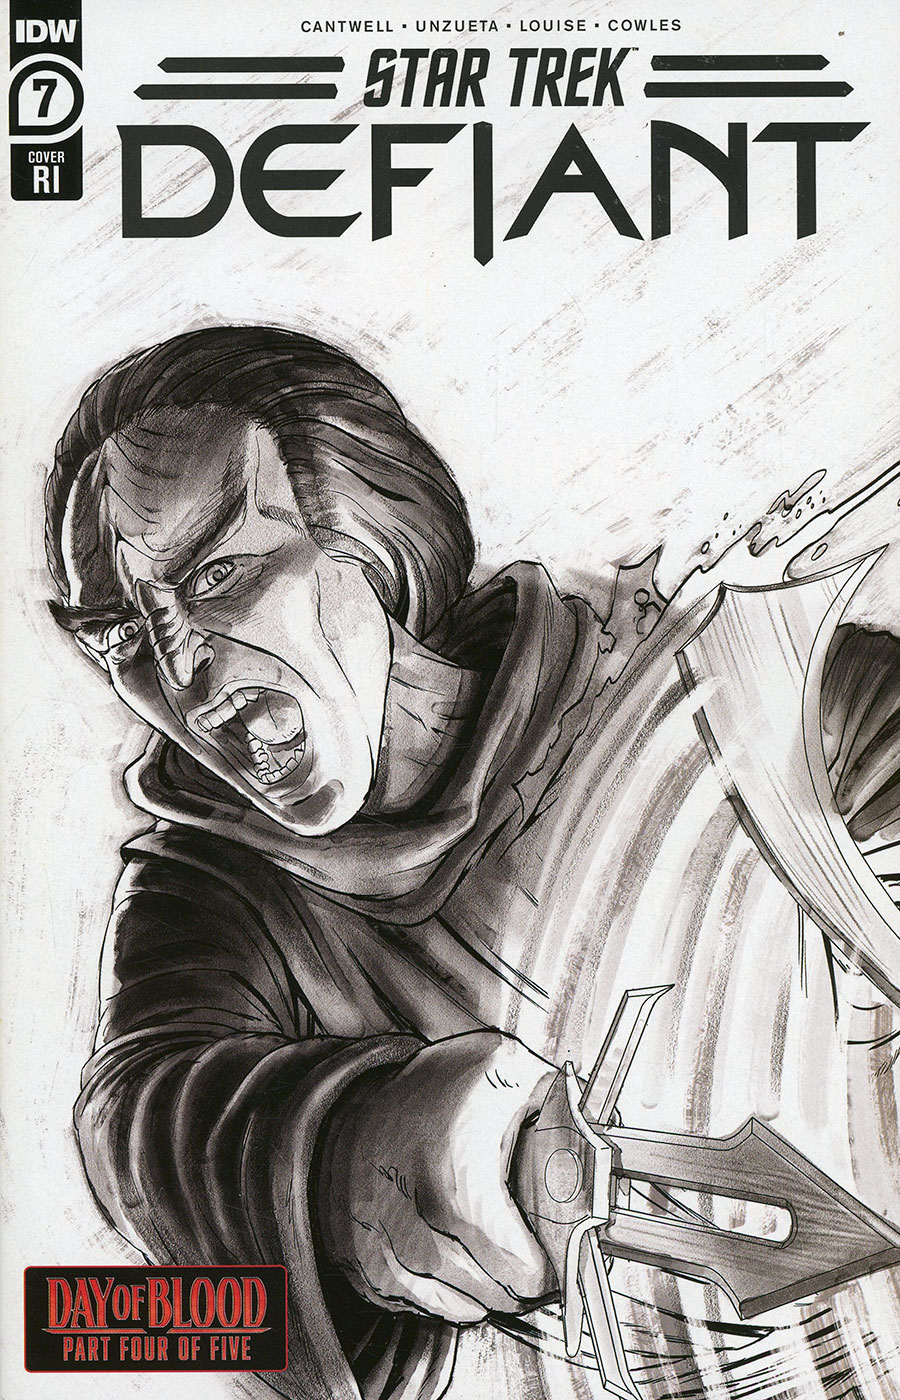 Star Trek Defiant #7 Cover D Incentive Malachi Ward Black & White Cover (Day Of Blood Part 4)